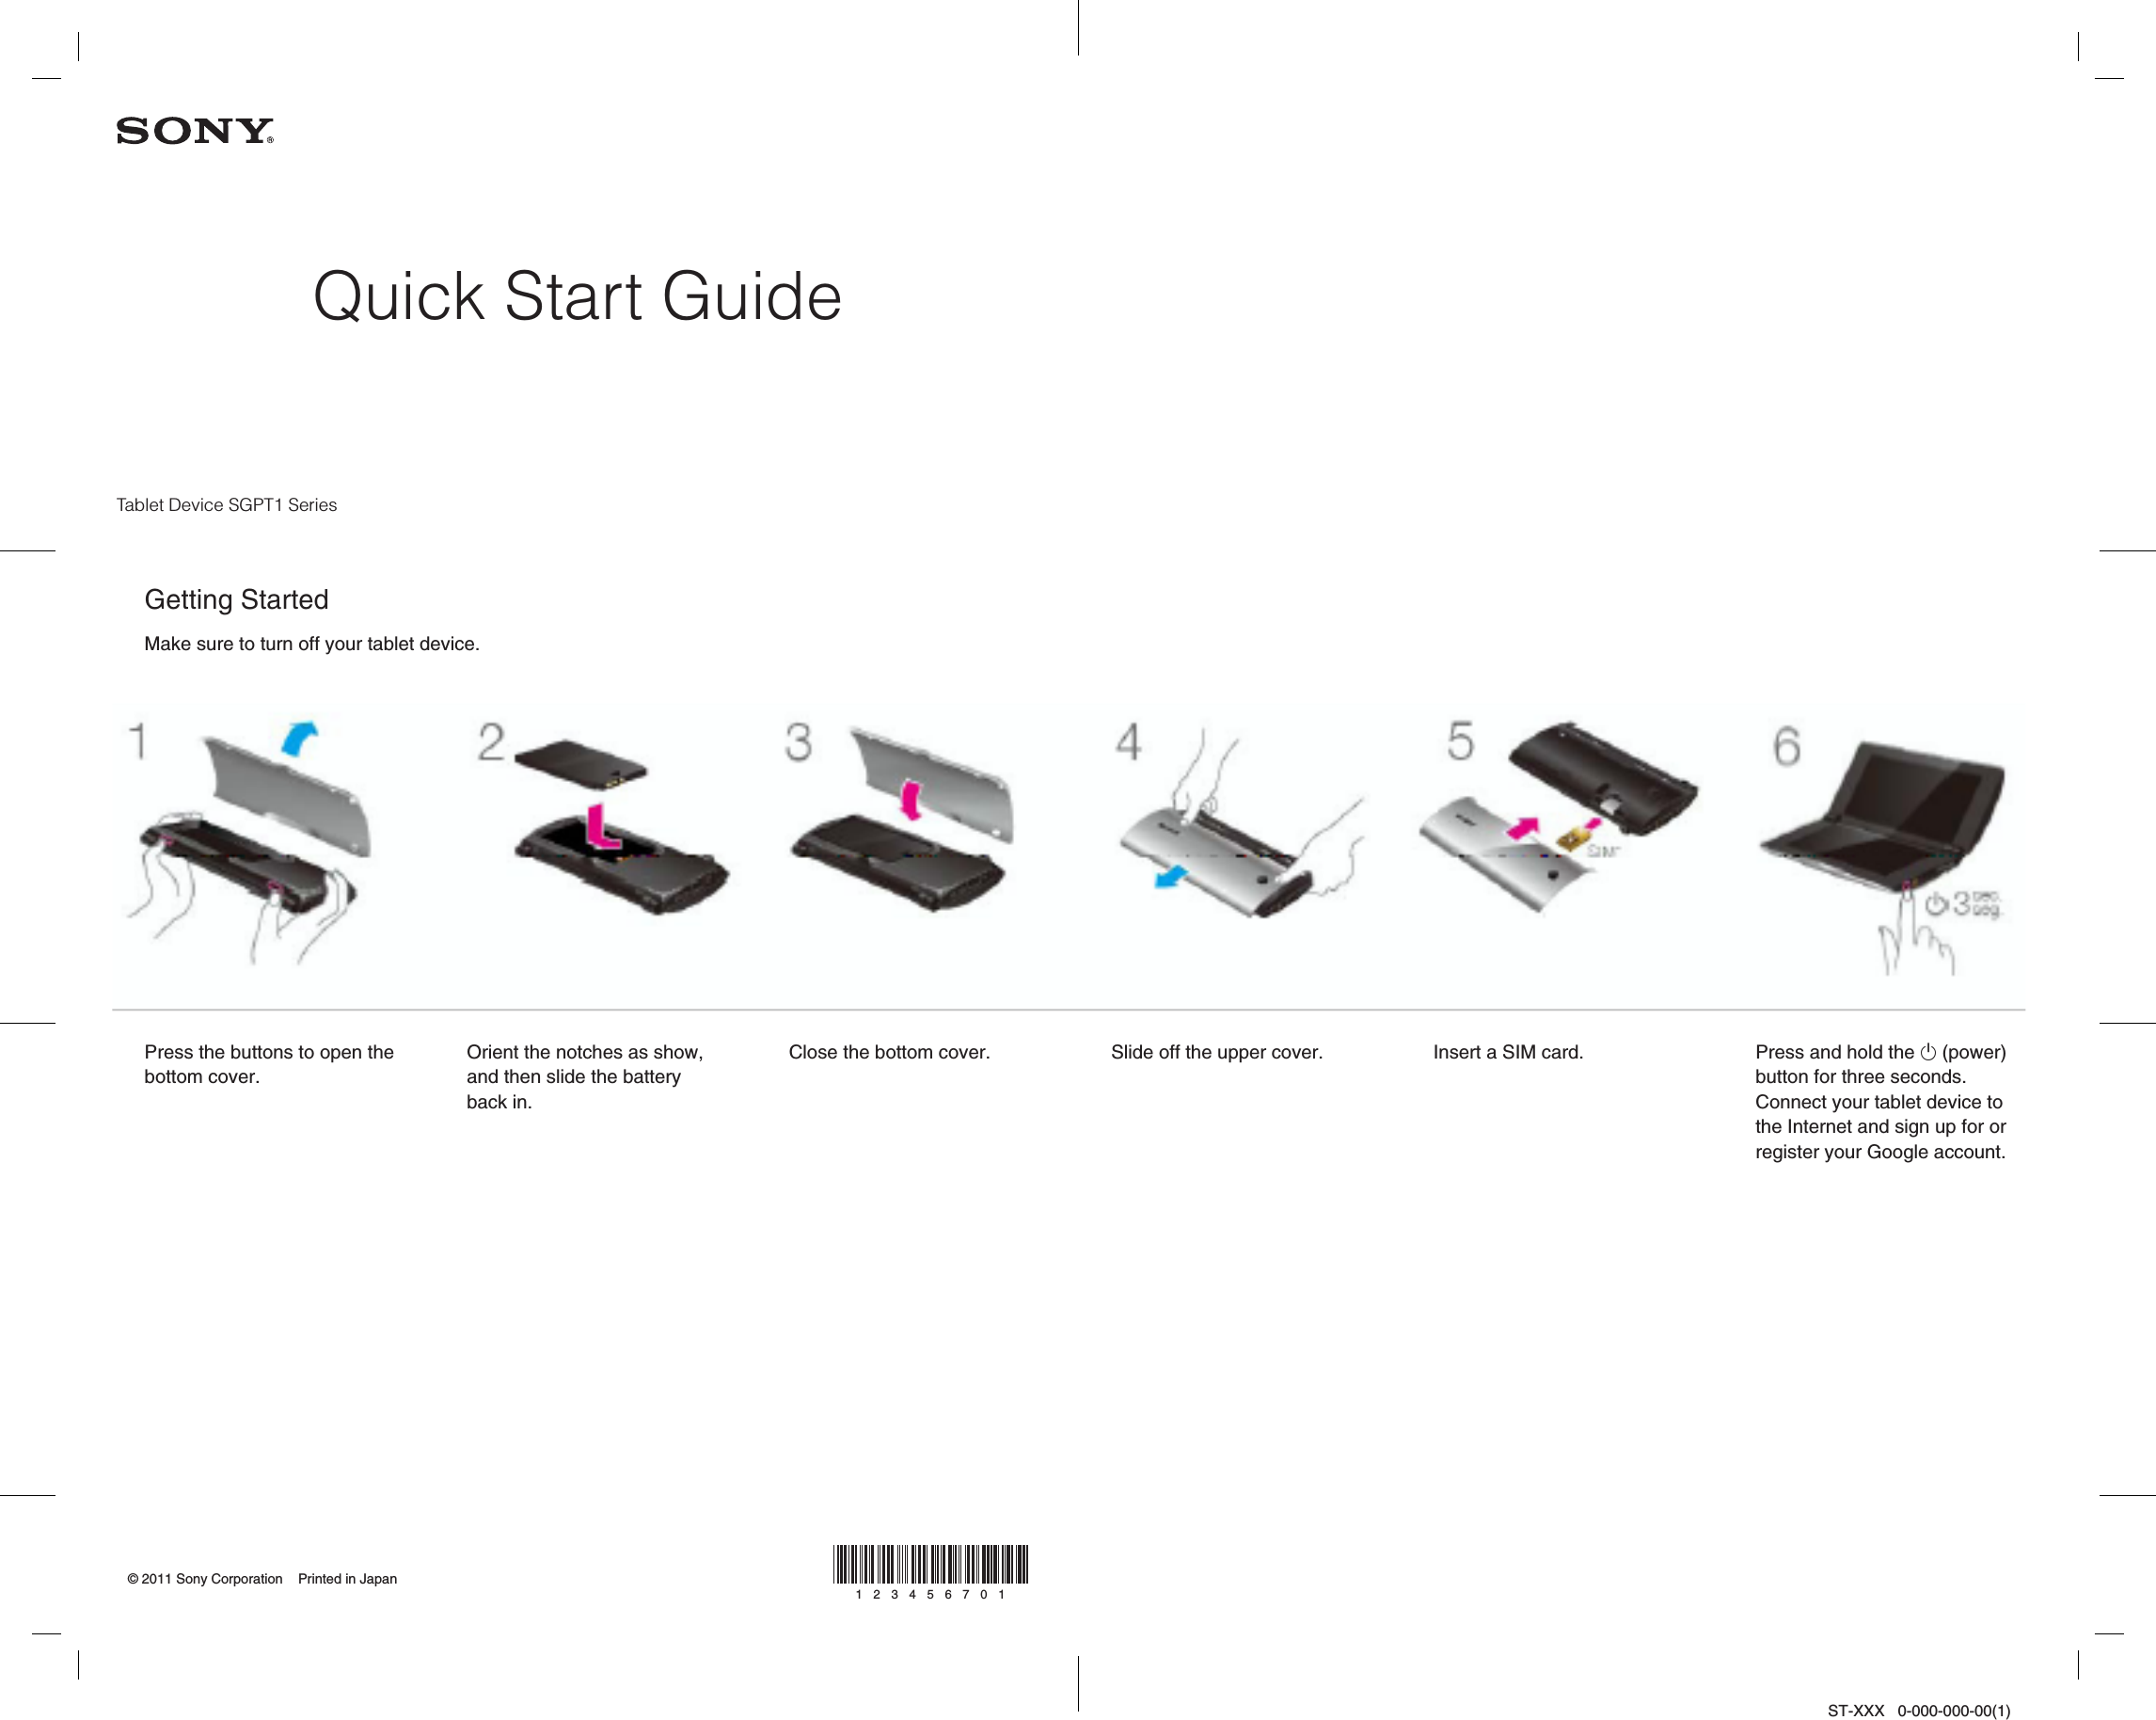 ST-XXX   0-000-000-00(1)Quick Start Guide© 2011 Sony Corporation    Printed in Japan123456701Press the buttons to open the bottom cover.Slide off the upper cover. Insert a SIM card. Press and hold the  (power) button for three seconds.Connect your tablet device to the Internet and sign up for or register your Google account.Orient the notches as show, and then slide the battery back in.Close the bottom cover.Tablet Device SGPT1 SeriesGetting StartedMake sure to turn off your tablet device.